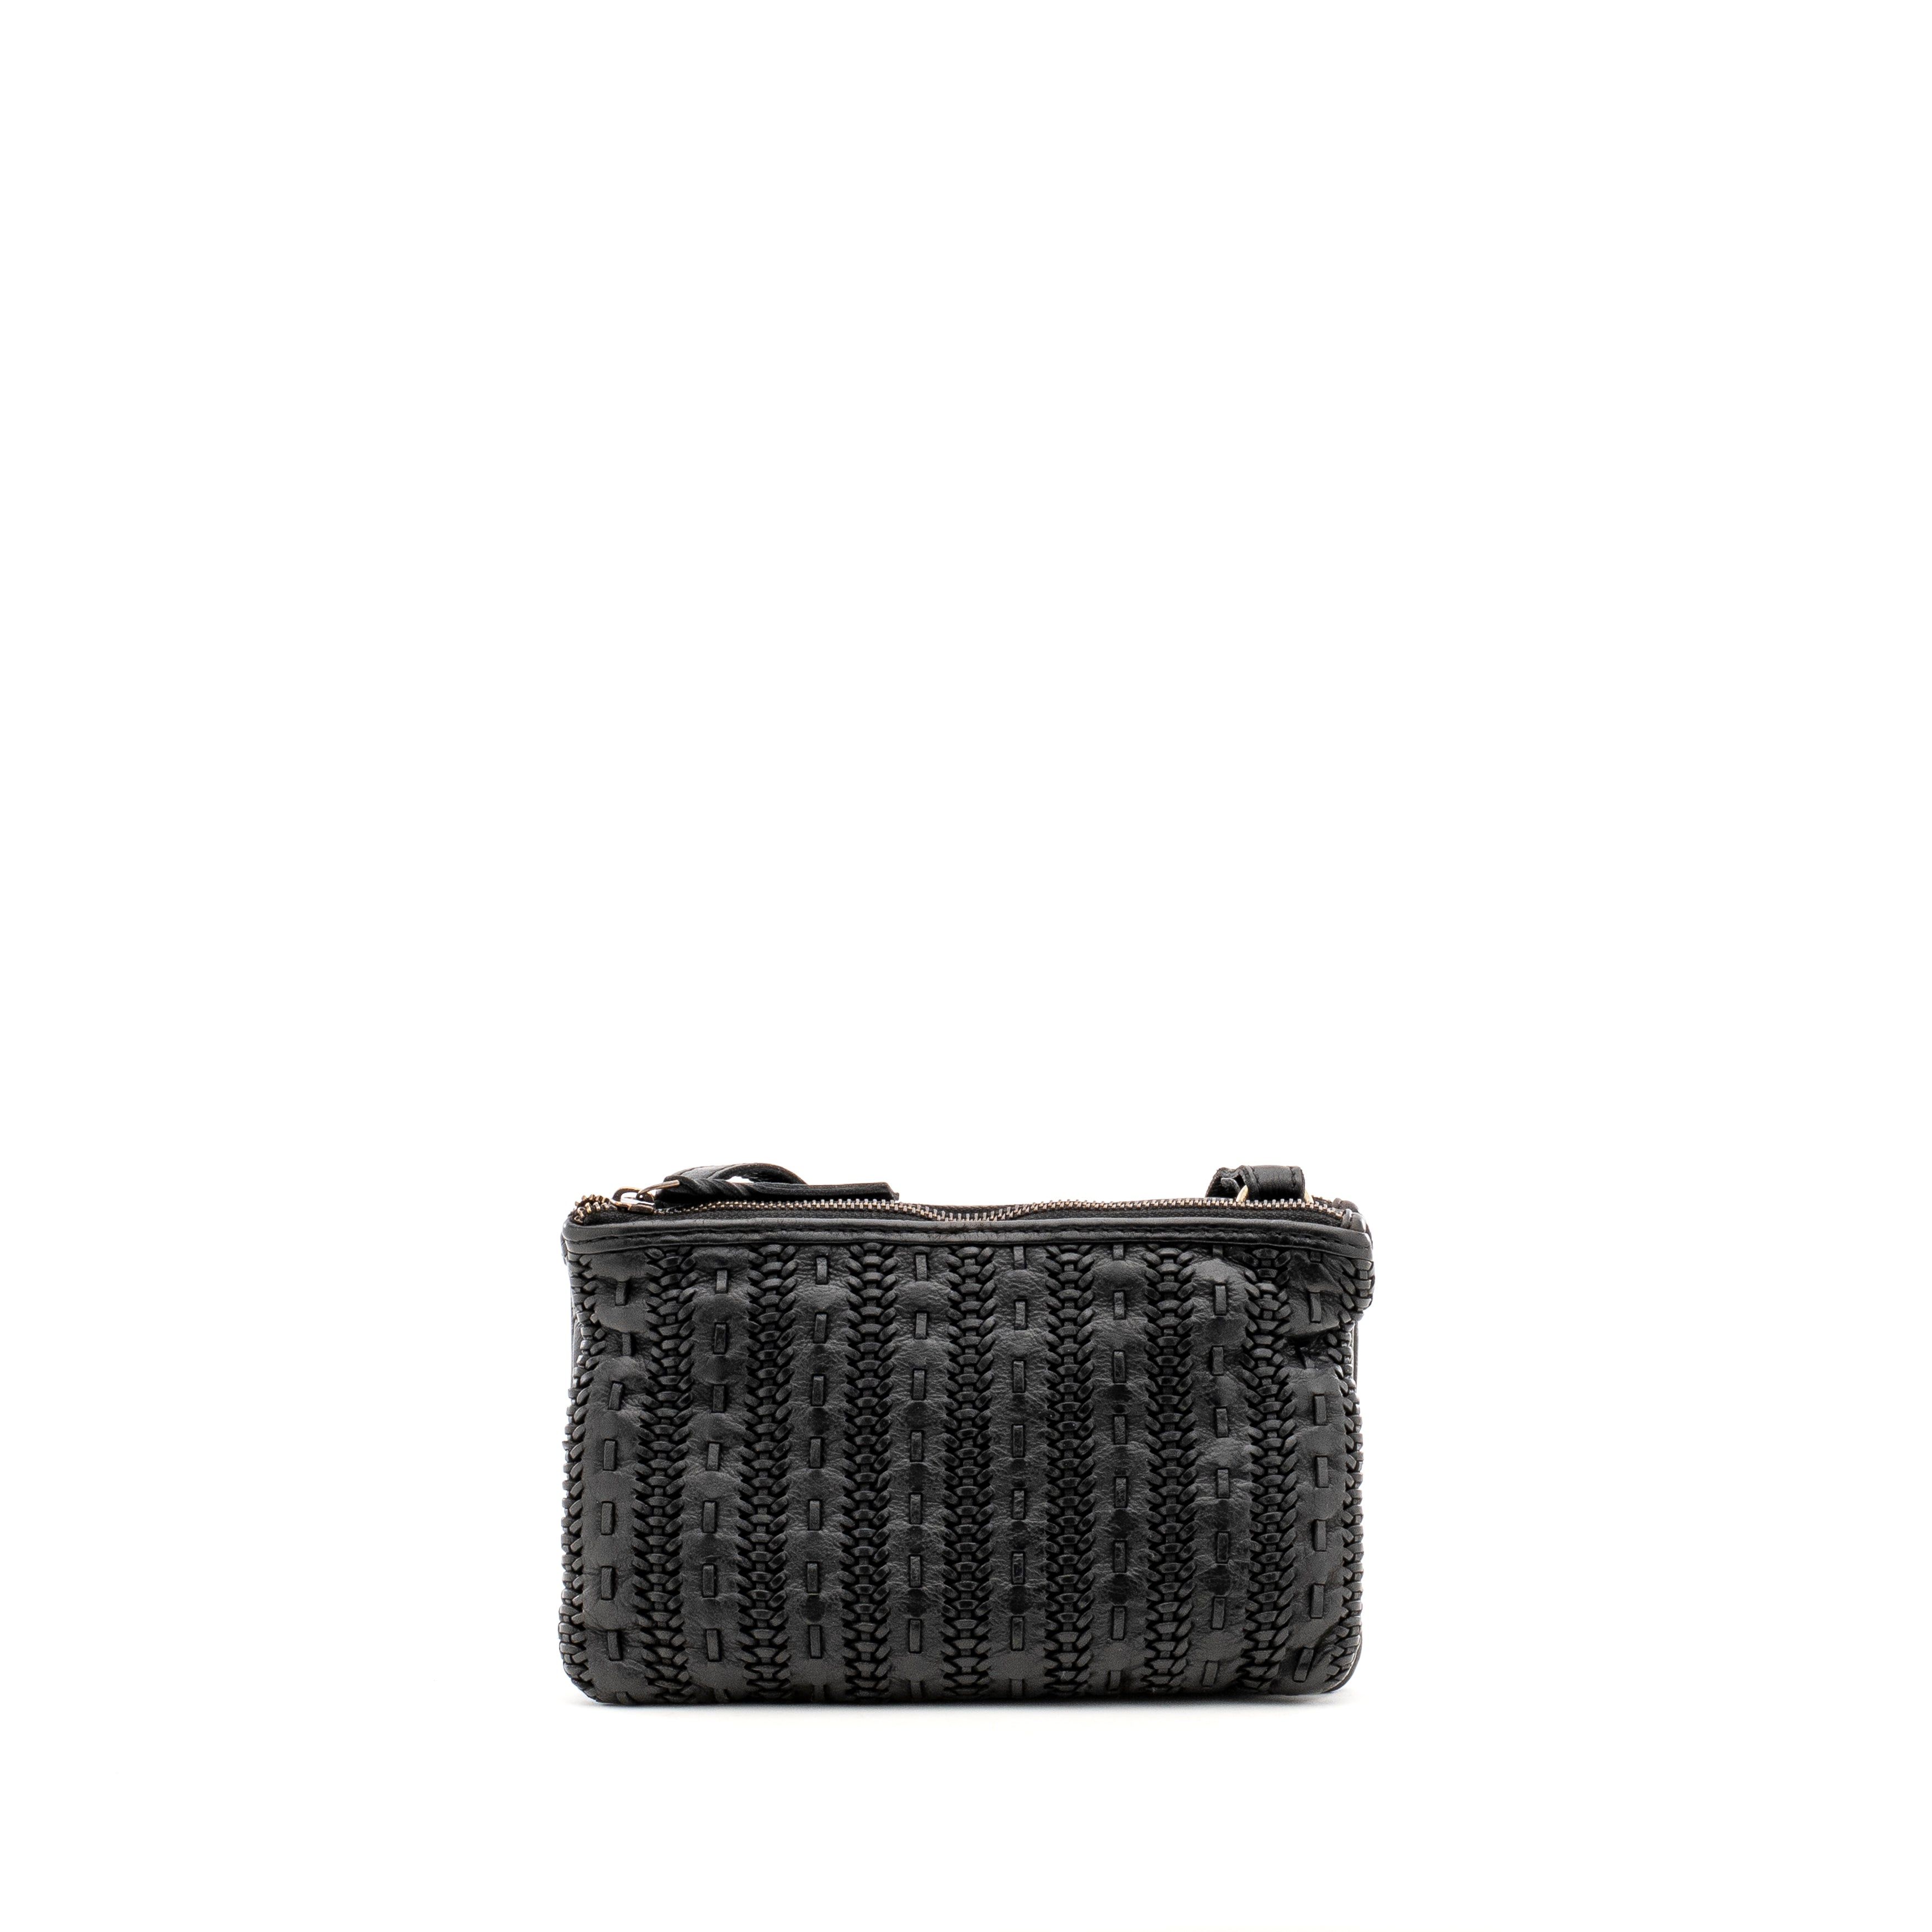 Black woven leather clutch bag with zipper closure